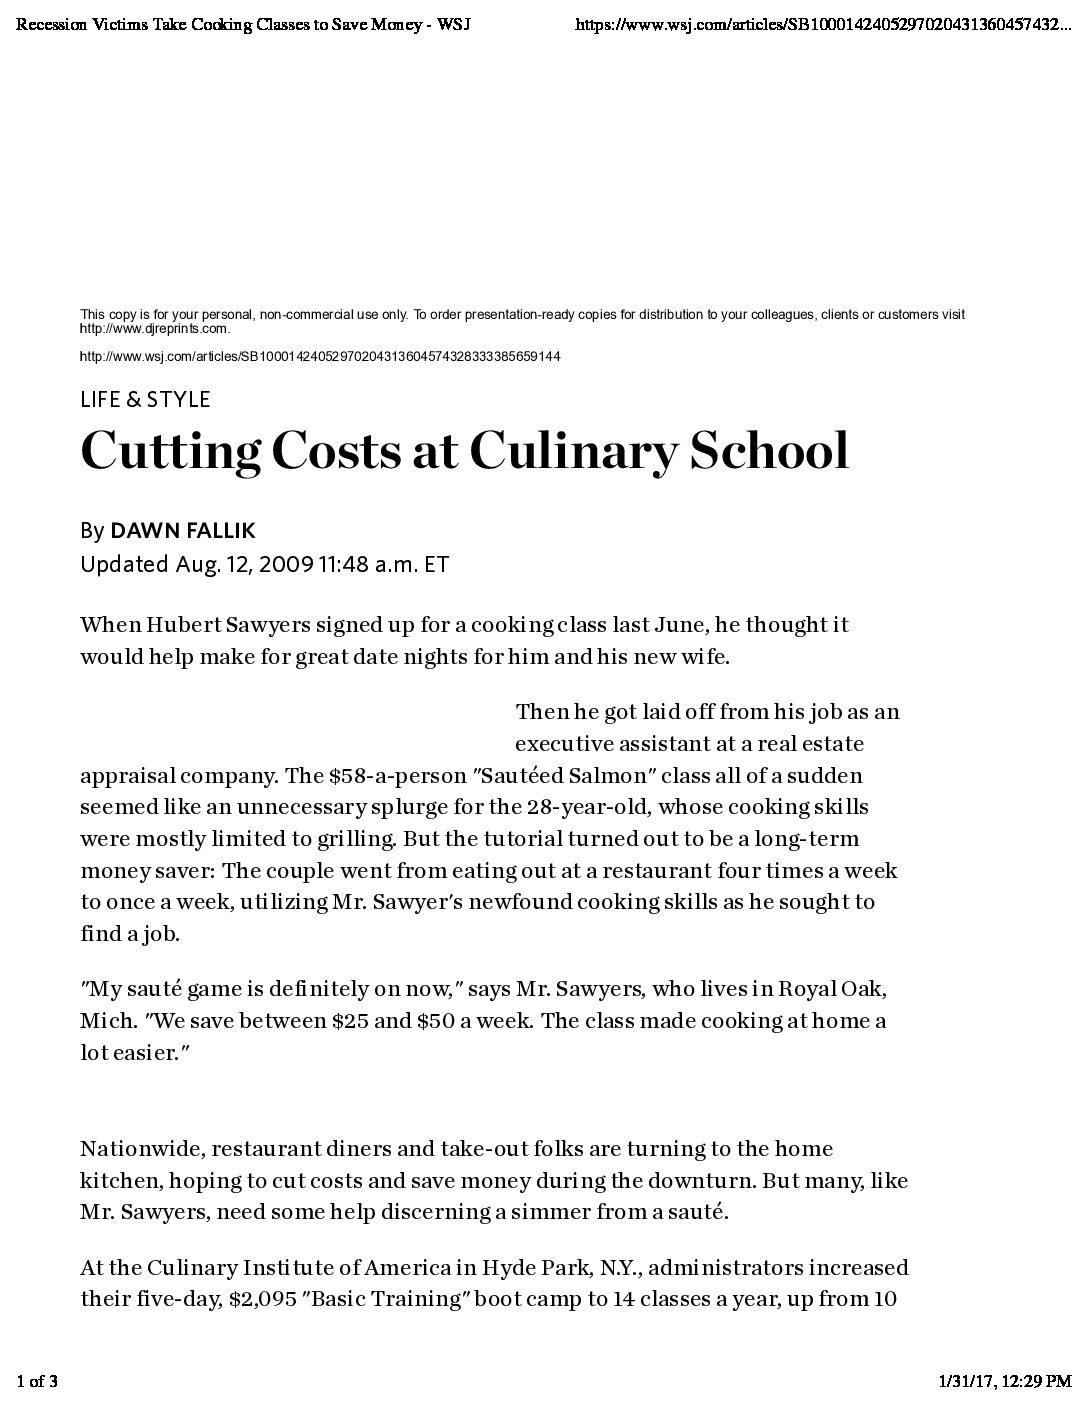 Cutting Costs at Culinary School